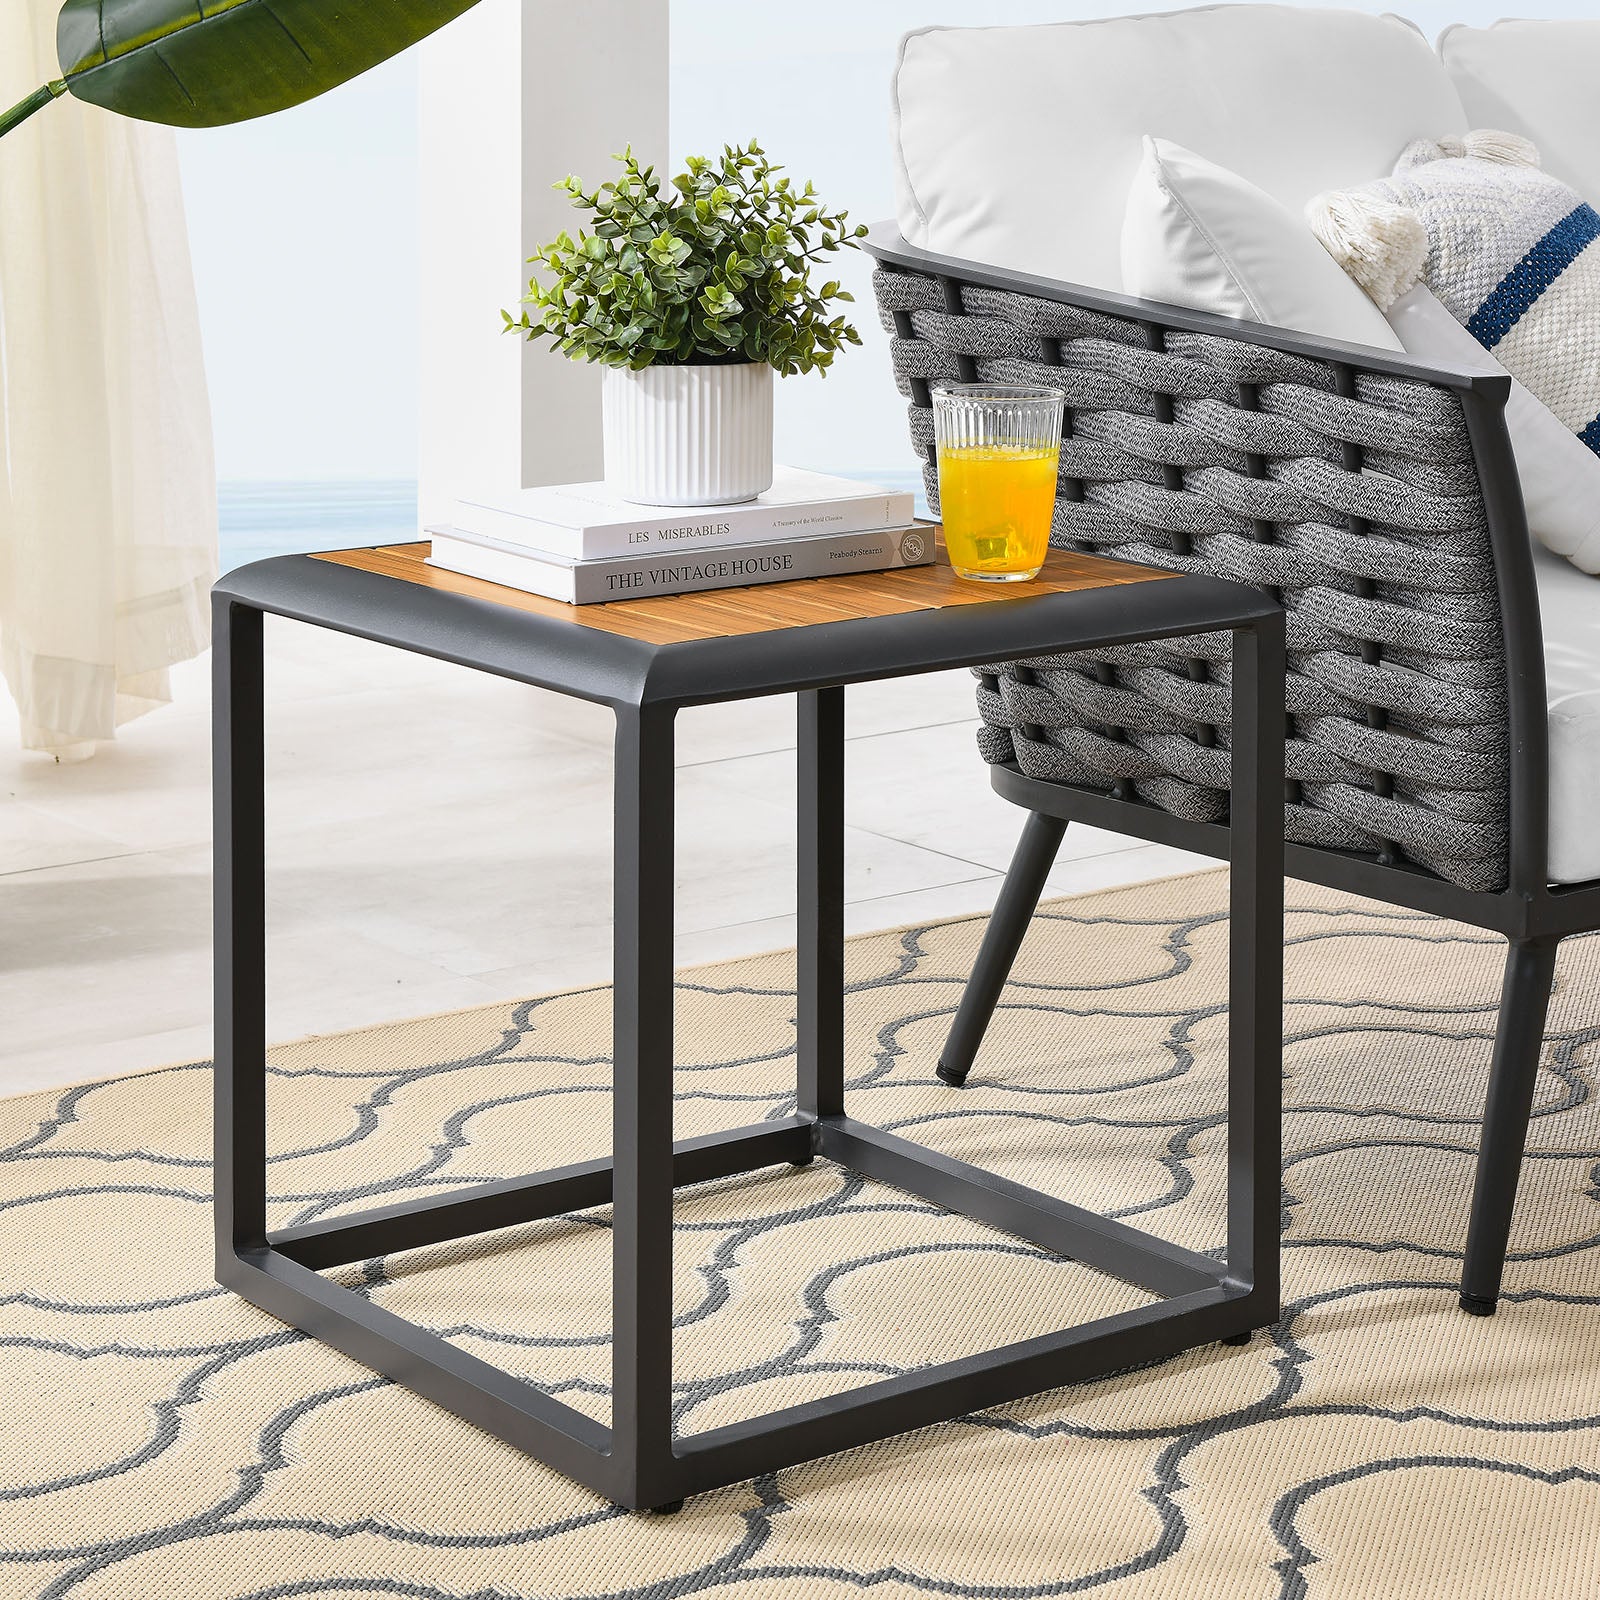 Stance Outdoor Patio Aluminum Side Table - East Shore Modern Home Furnishings